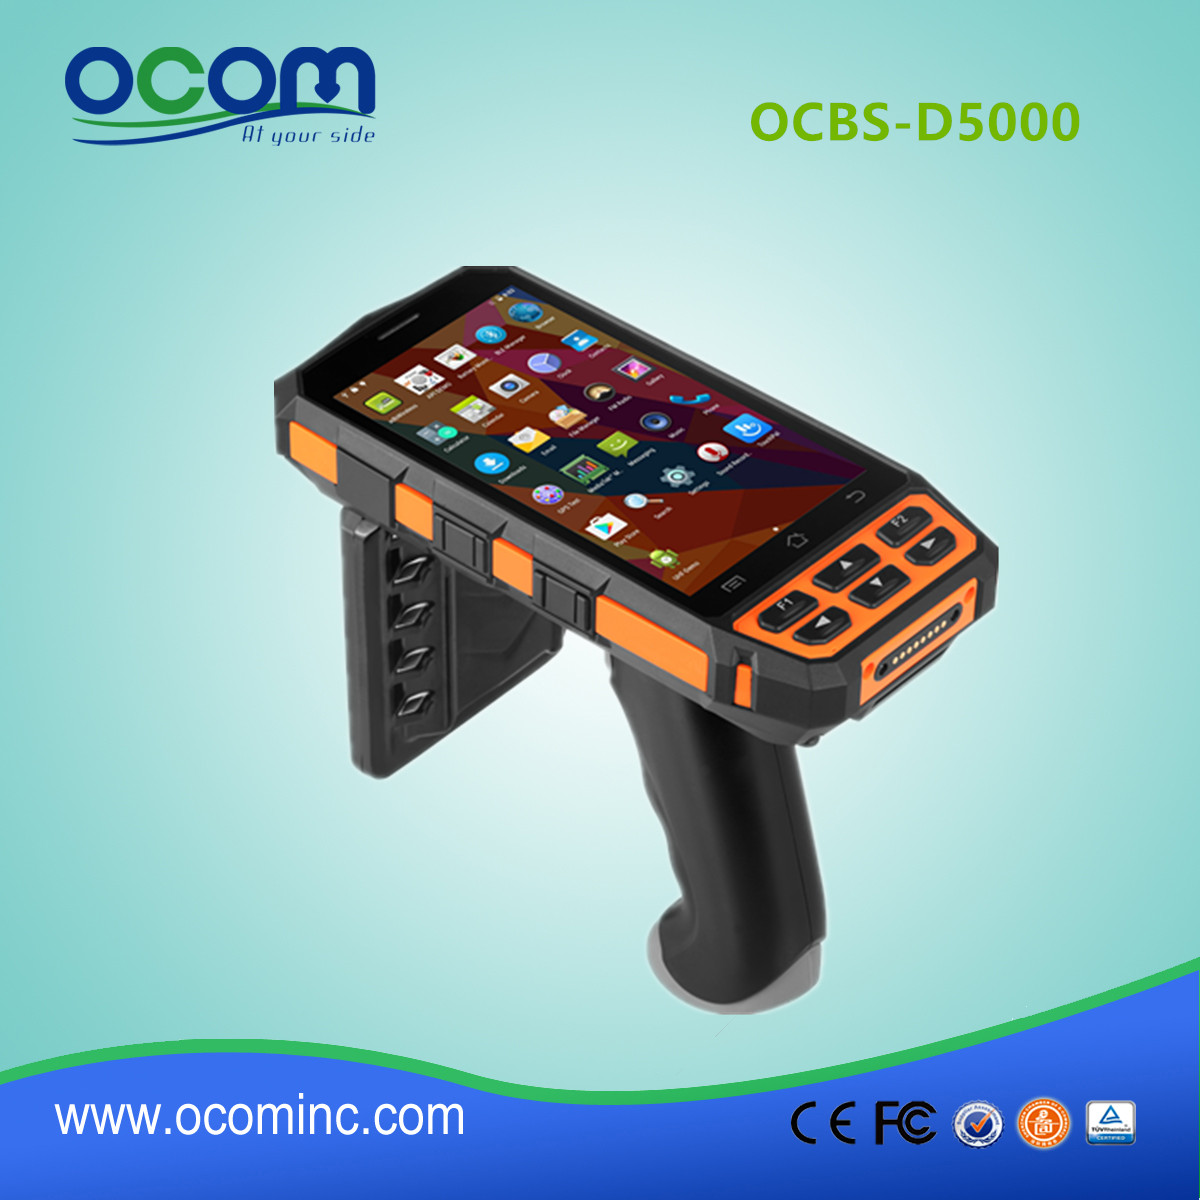 OCBS-D5000 Handheld android portable mobile data collector terminal